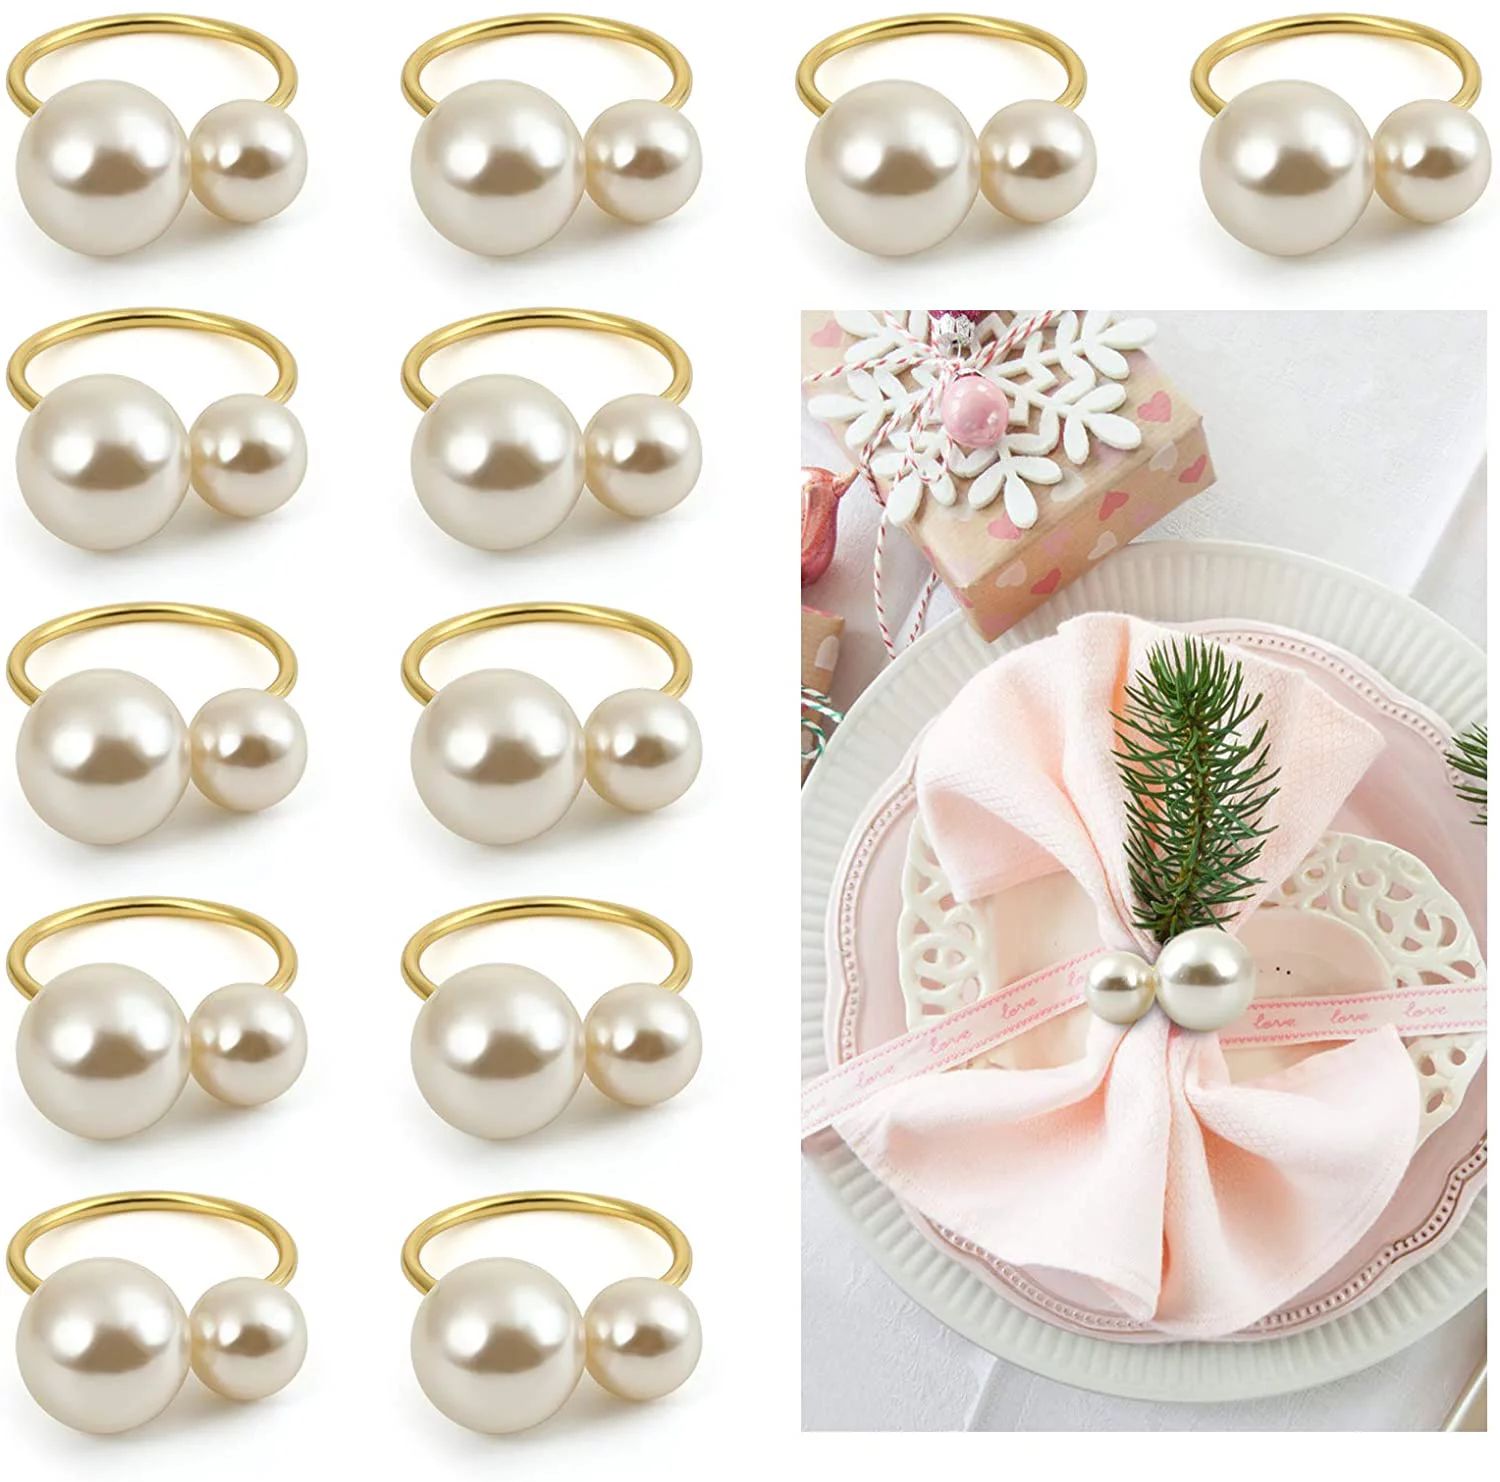 Naler Set of 12 Pearl Napkin Rings, Gold Napkin Ring Holders for Formal or Casual Dinning Table D... | Walmart (US)